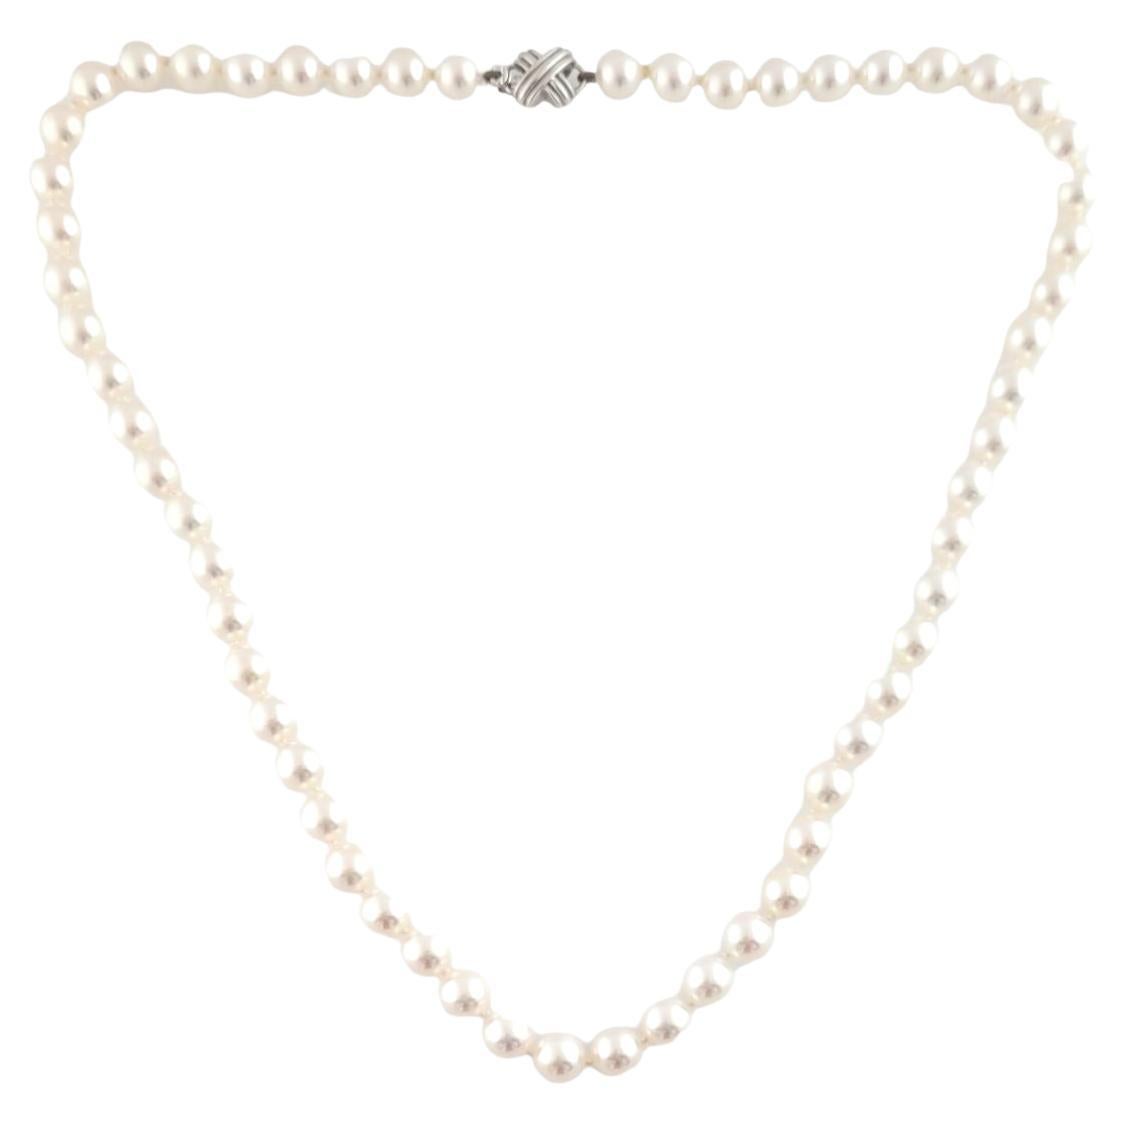 Tiffany & Co. 18K White Gold Pearl Necklace 18.5" #14735 For Sale